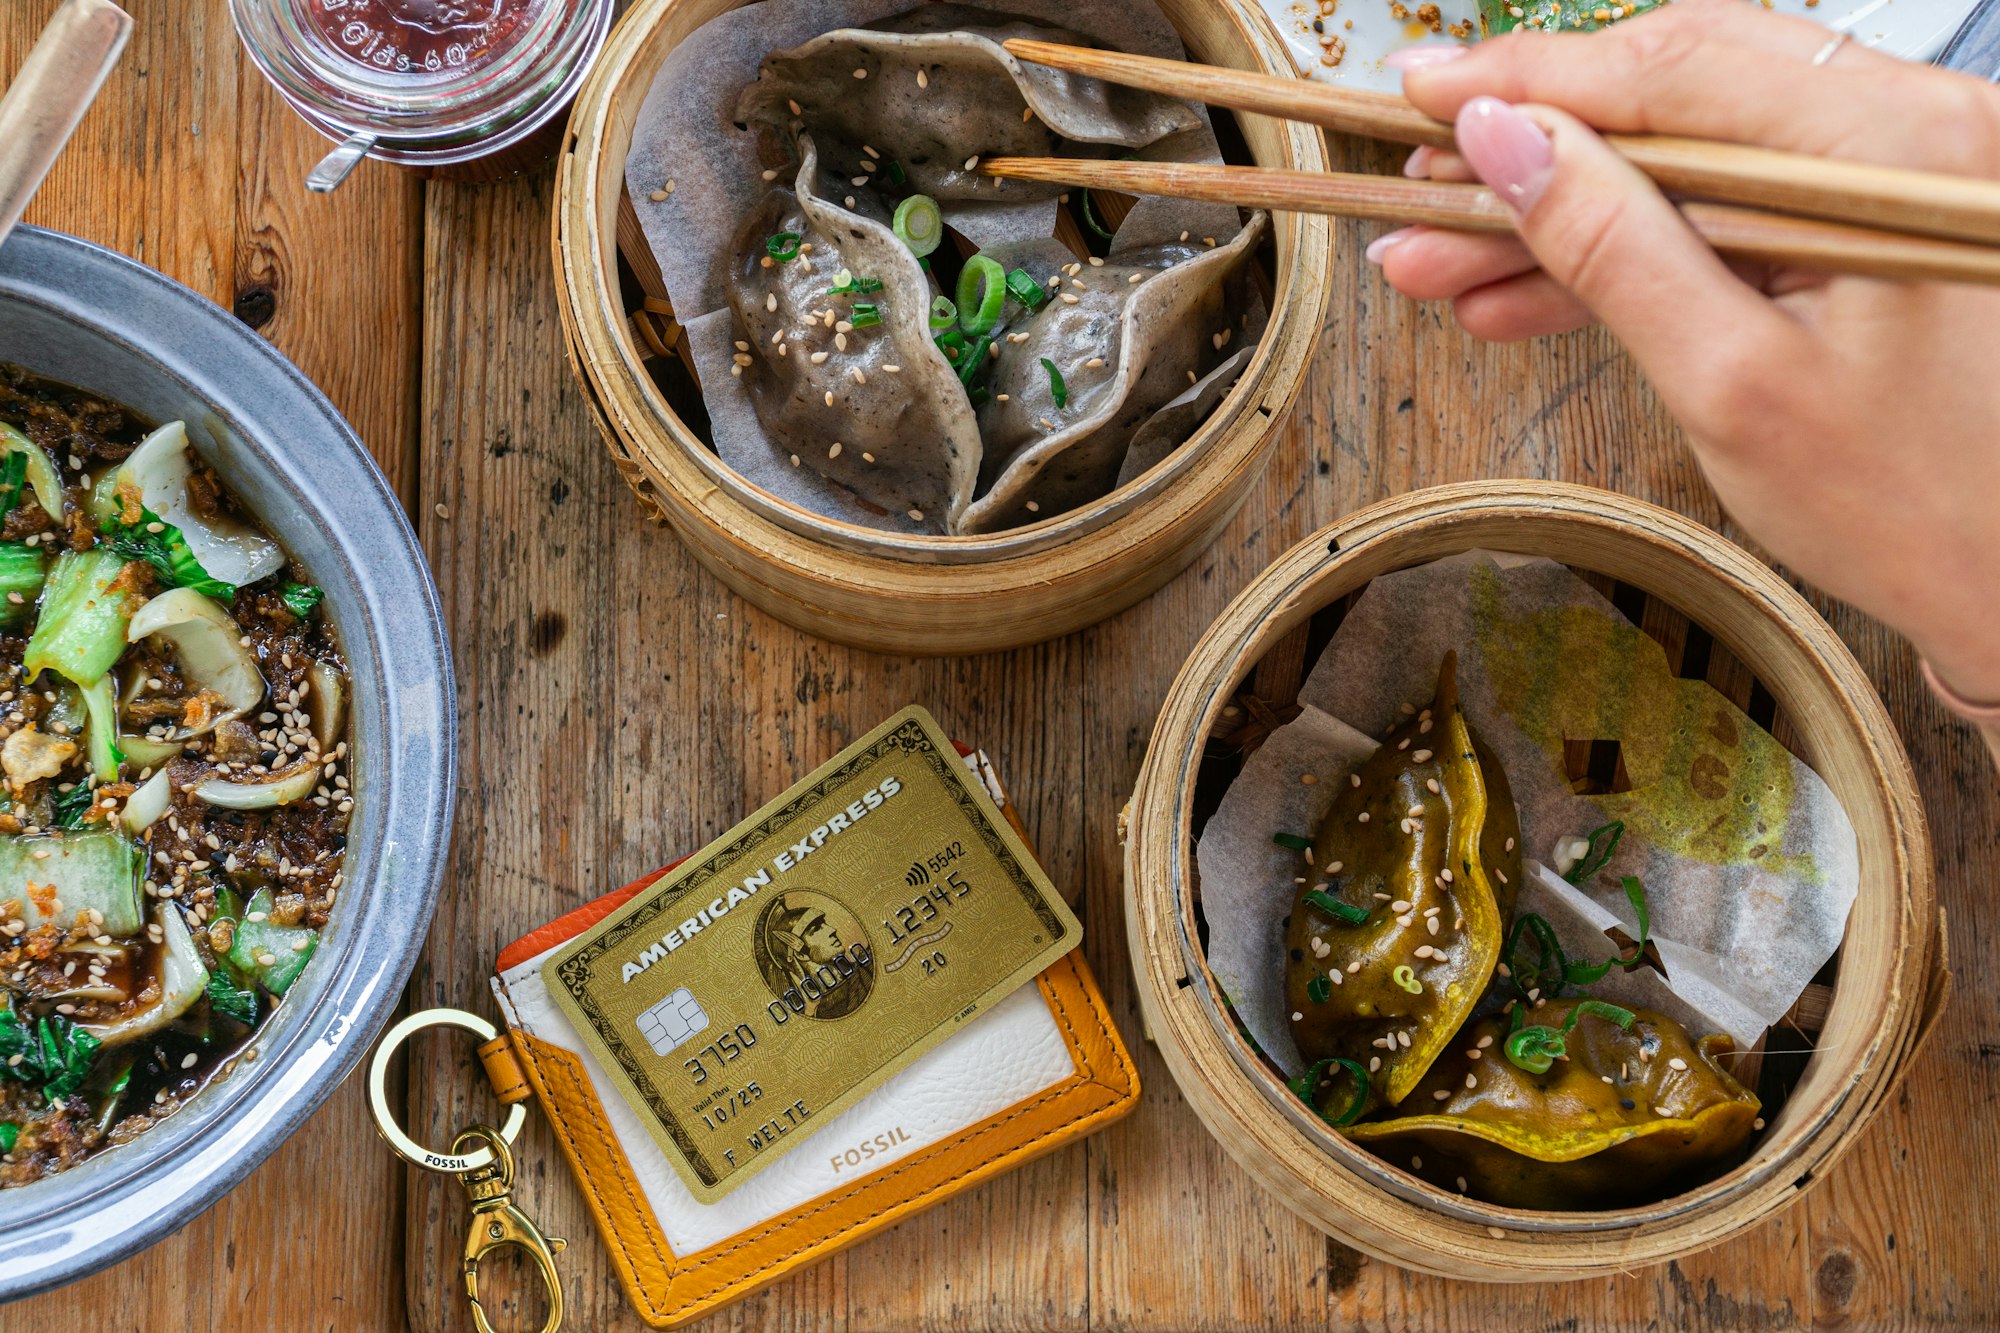 dim sums and amex credit card at Some Dim Sum